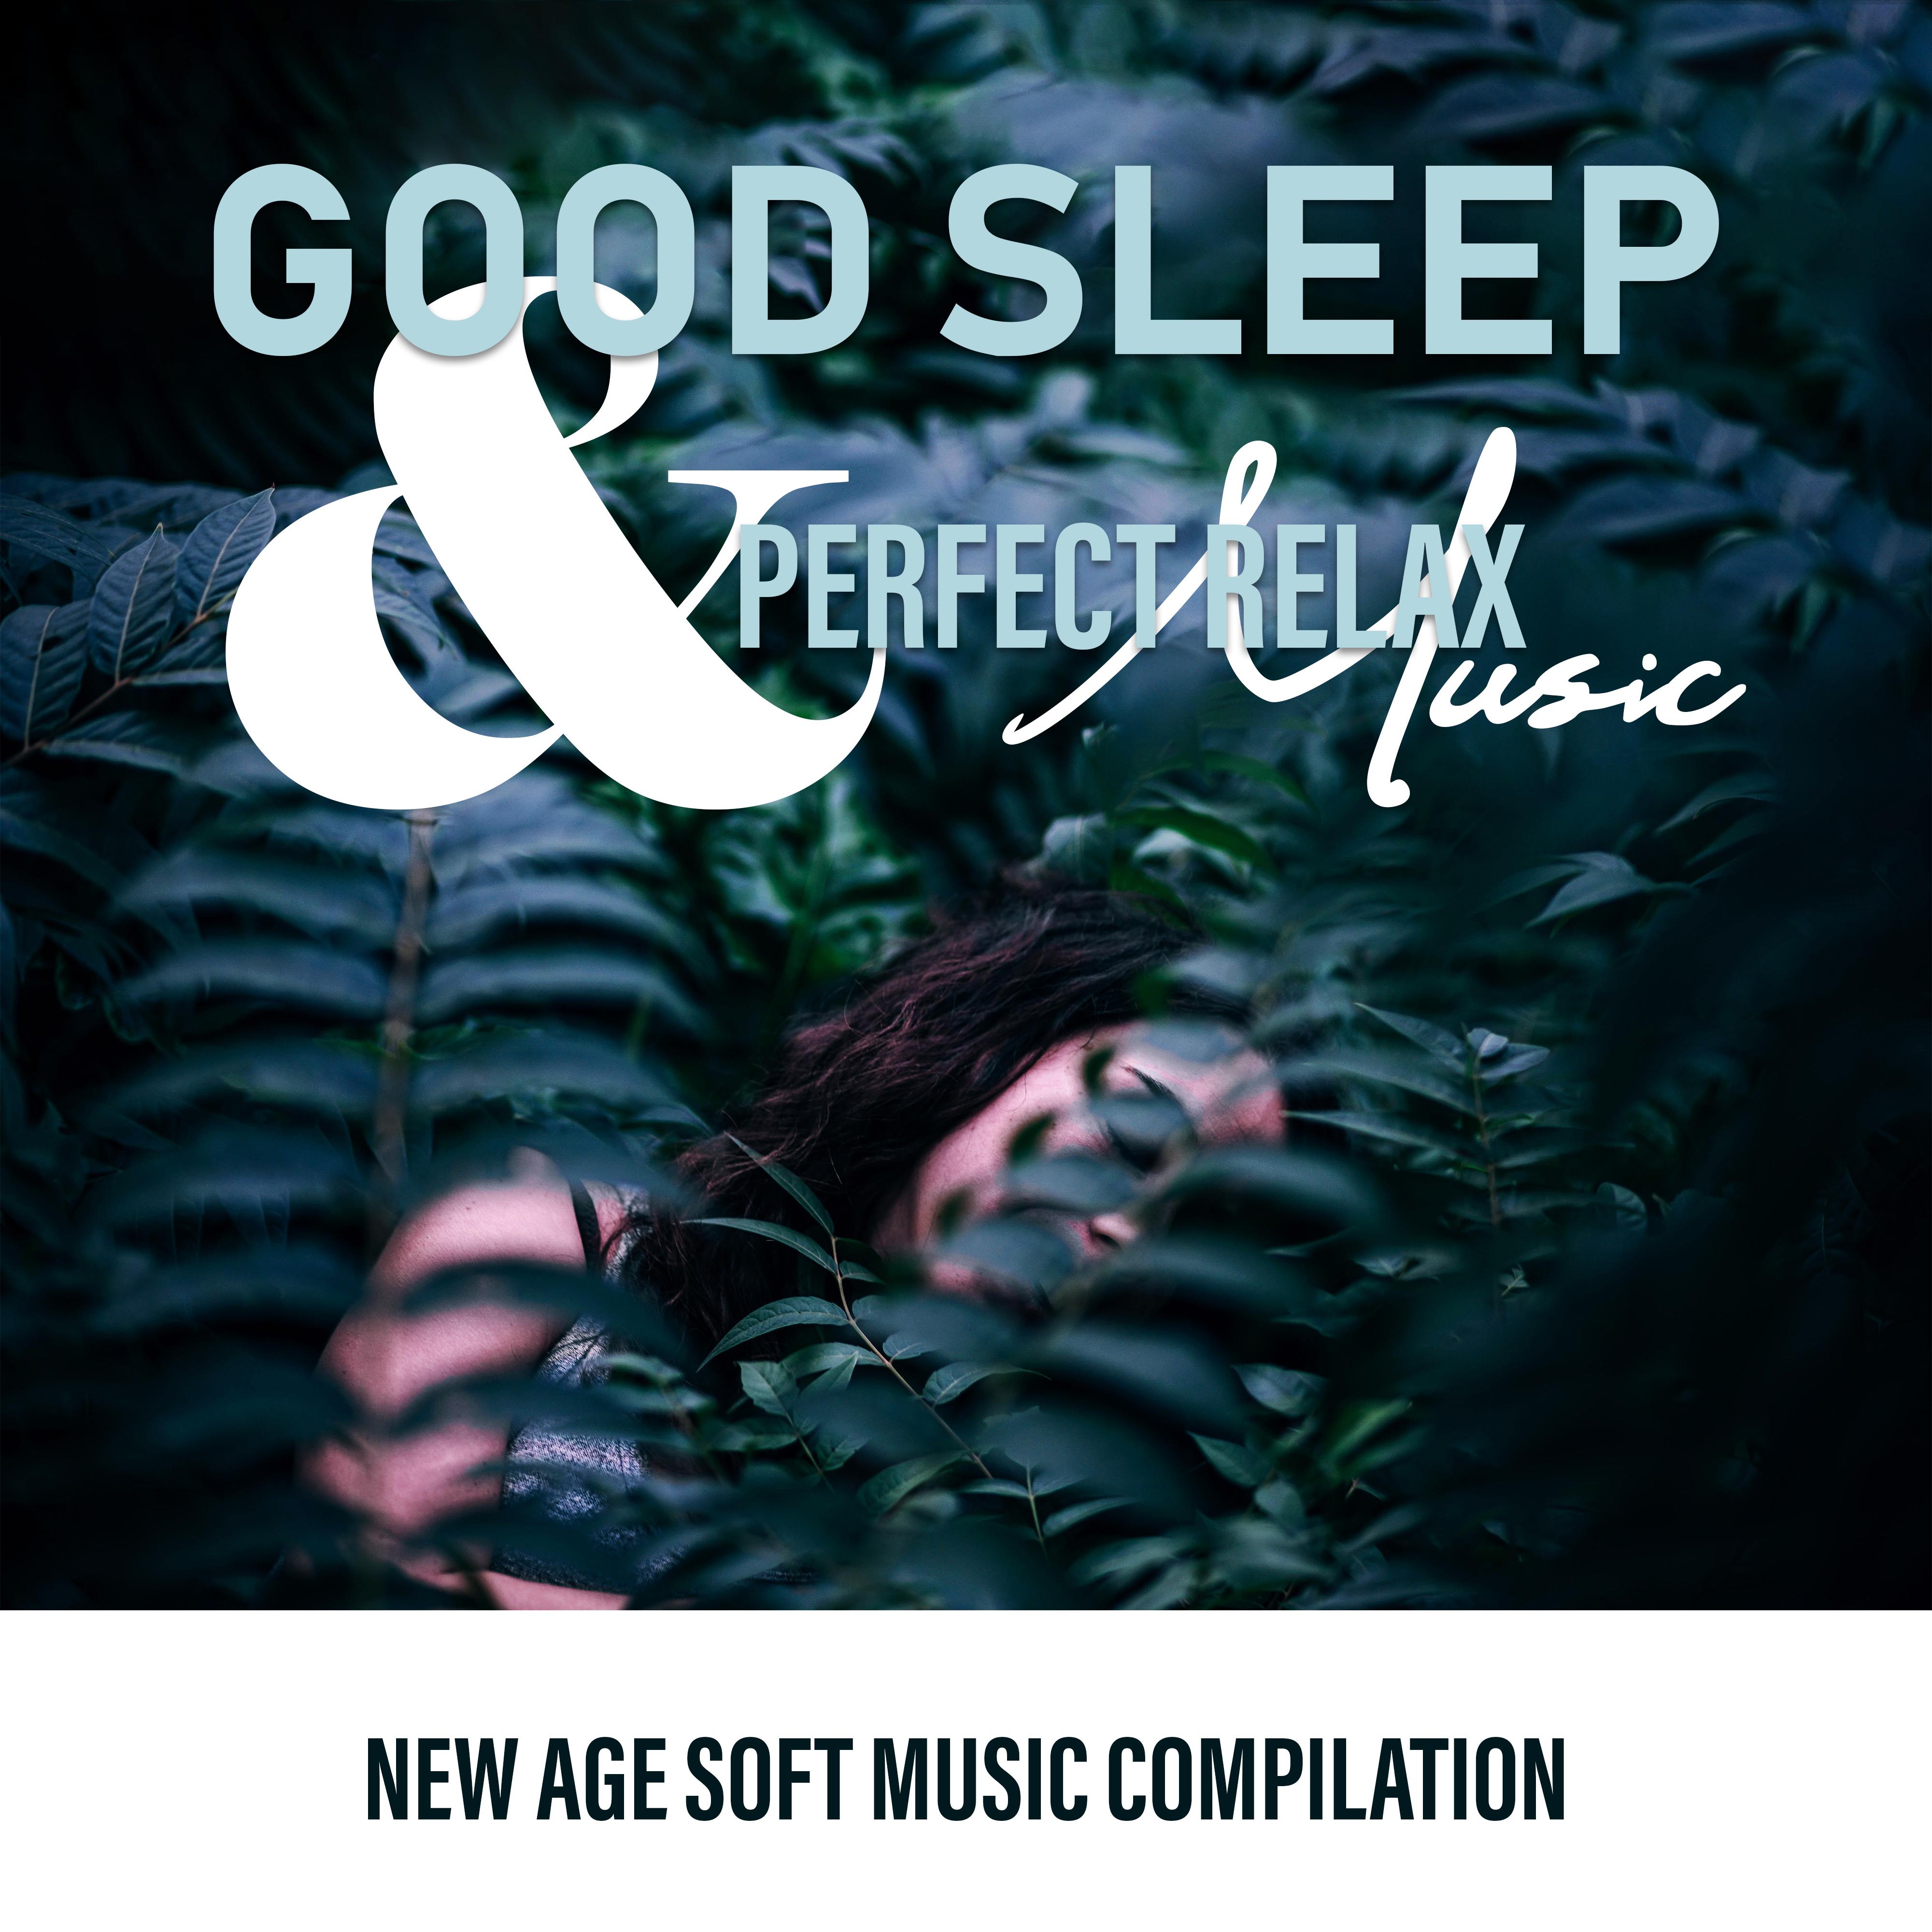 Good Sleep  Perfect Relax Music  New Age Soft Music Compilation